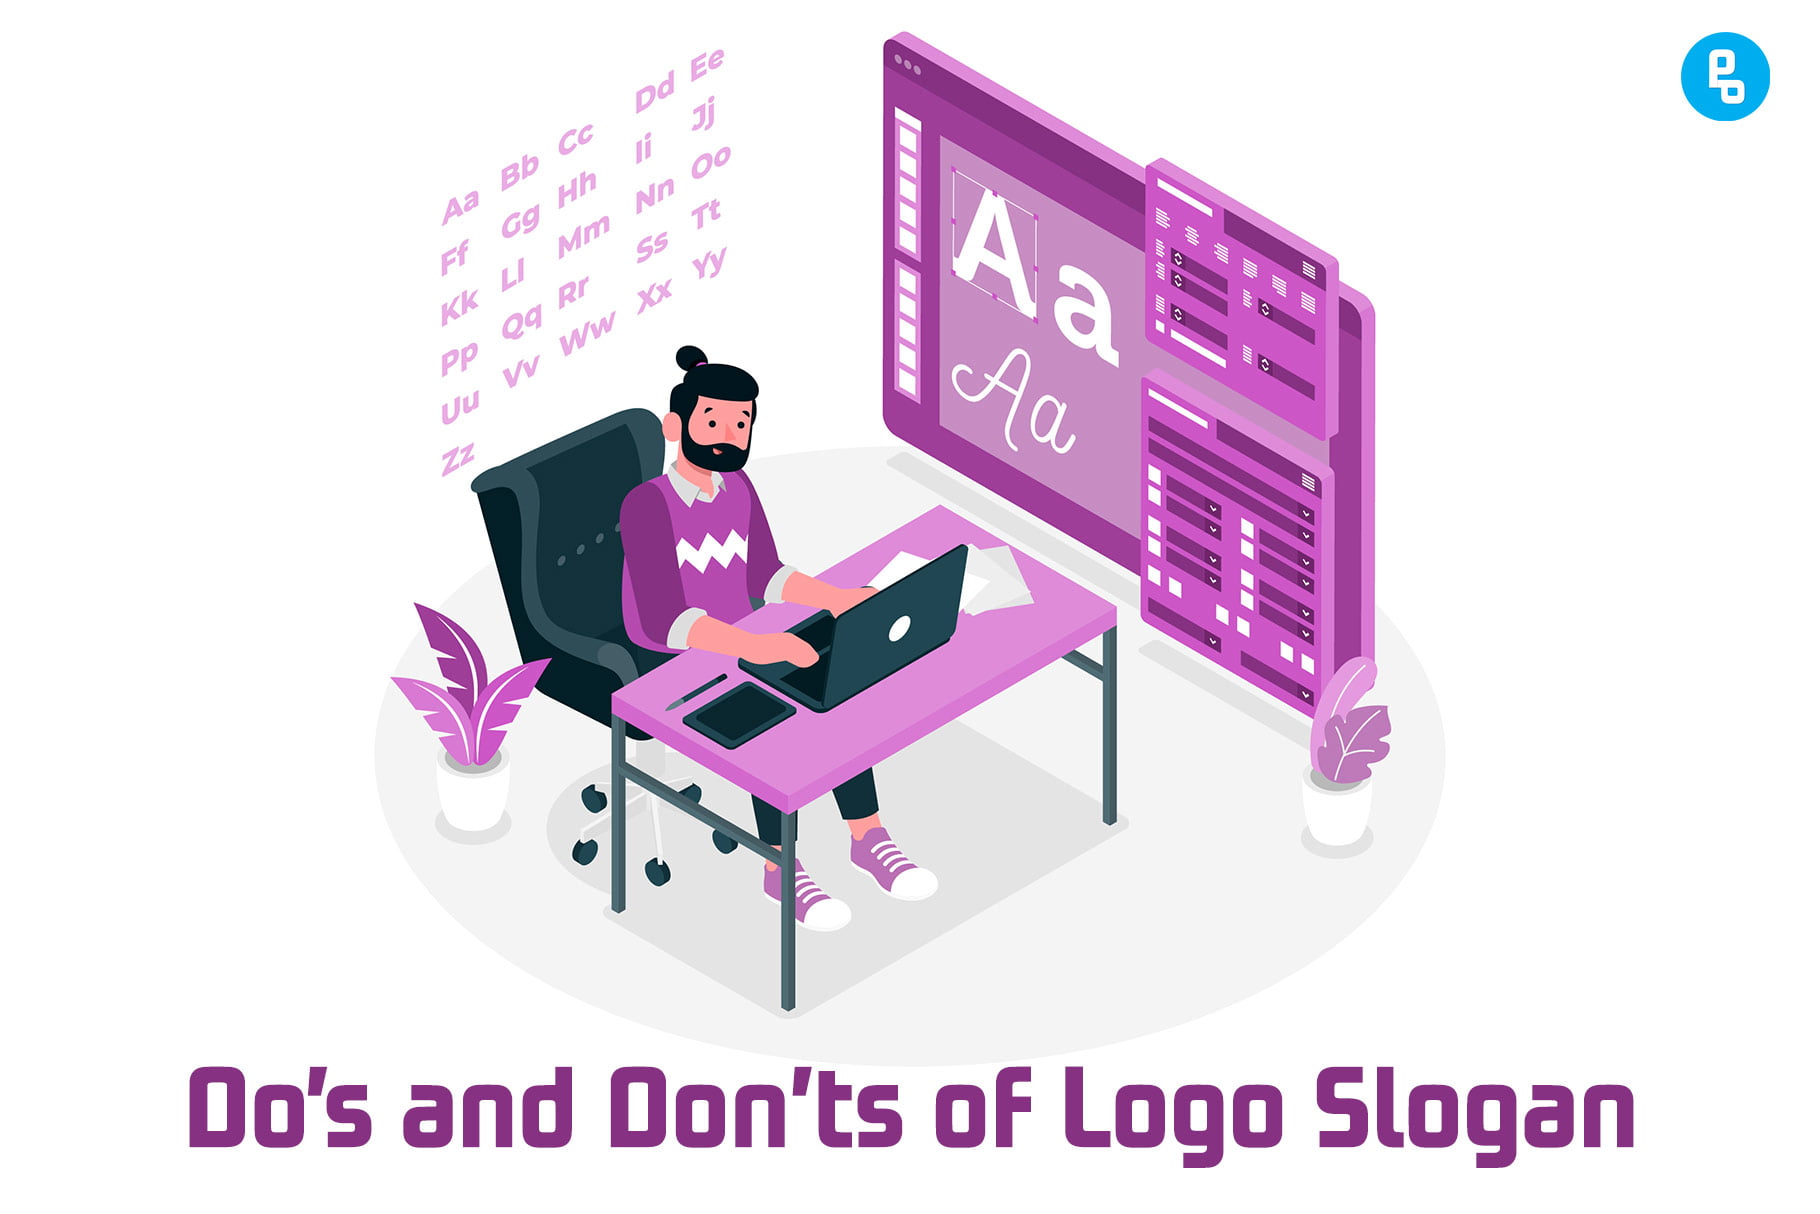 So, in this article, we'll go over how to create a slogan, how not to create a slogan, and some examples of great logo slogans that you can use as inspiration.